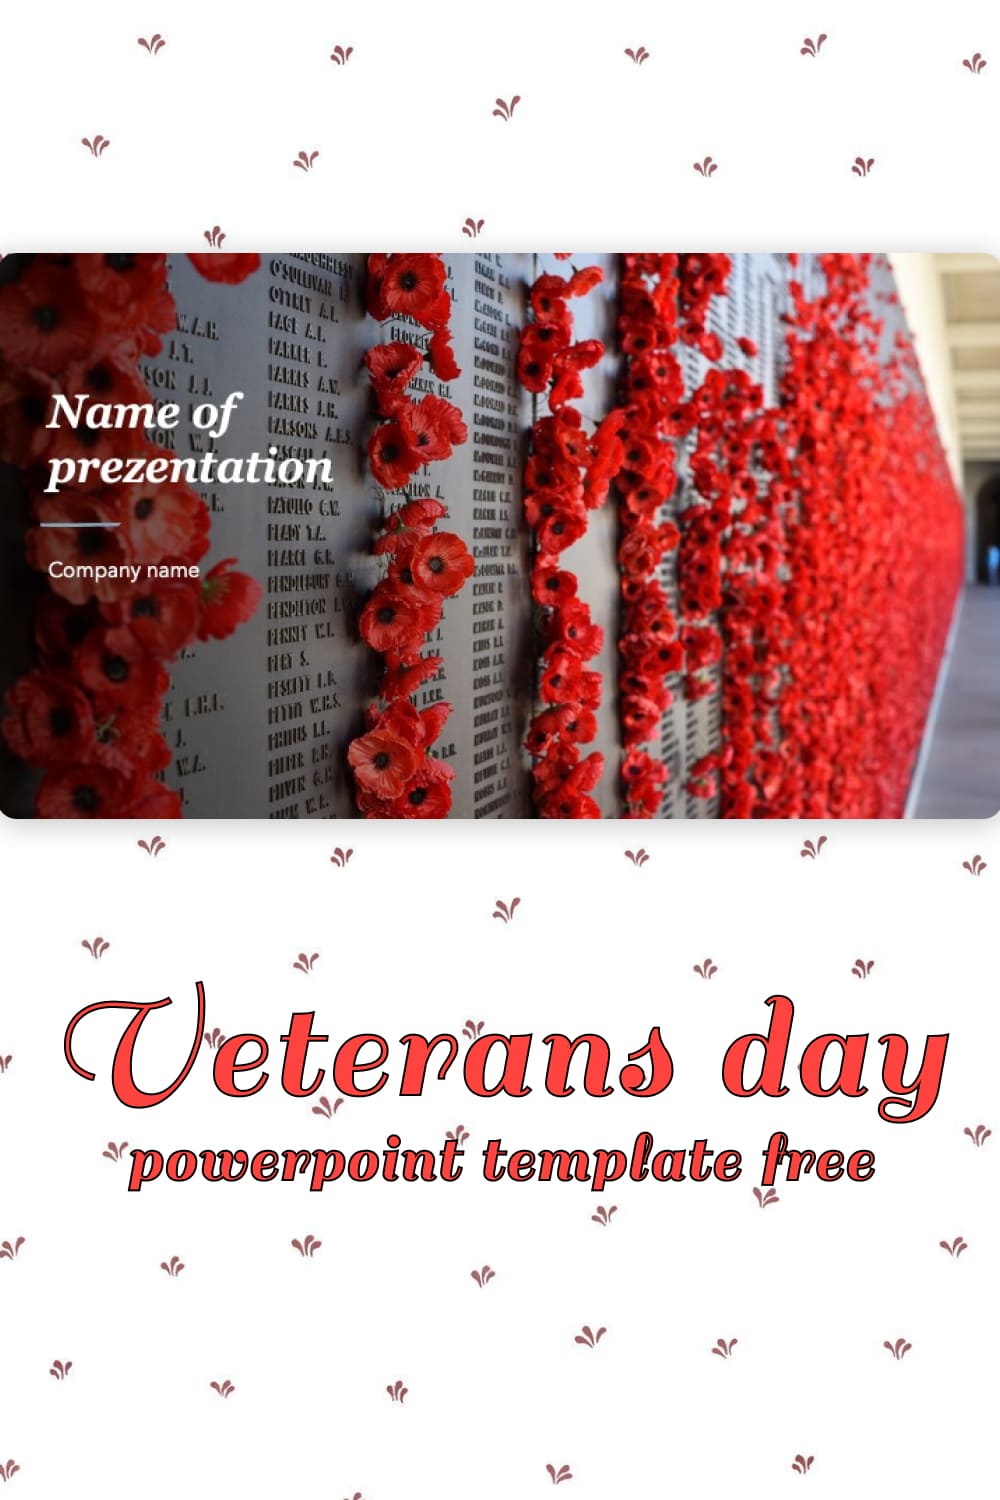 Pint Veterans Day Powerpoint Template Free.